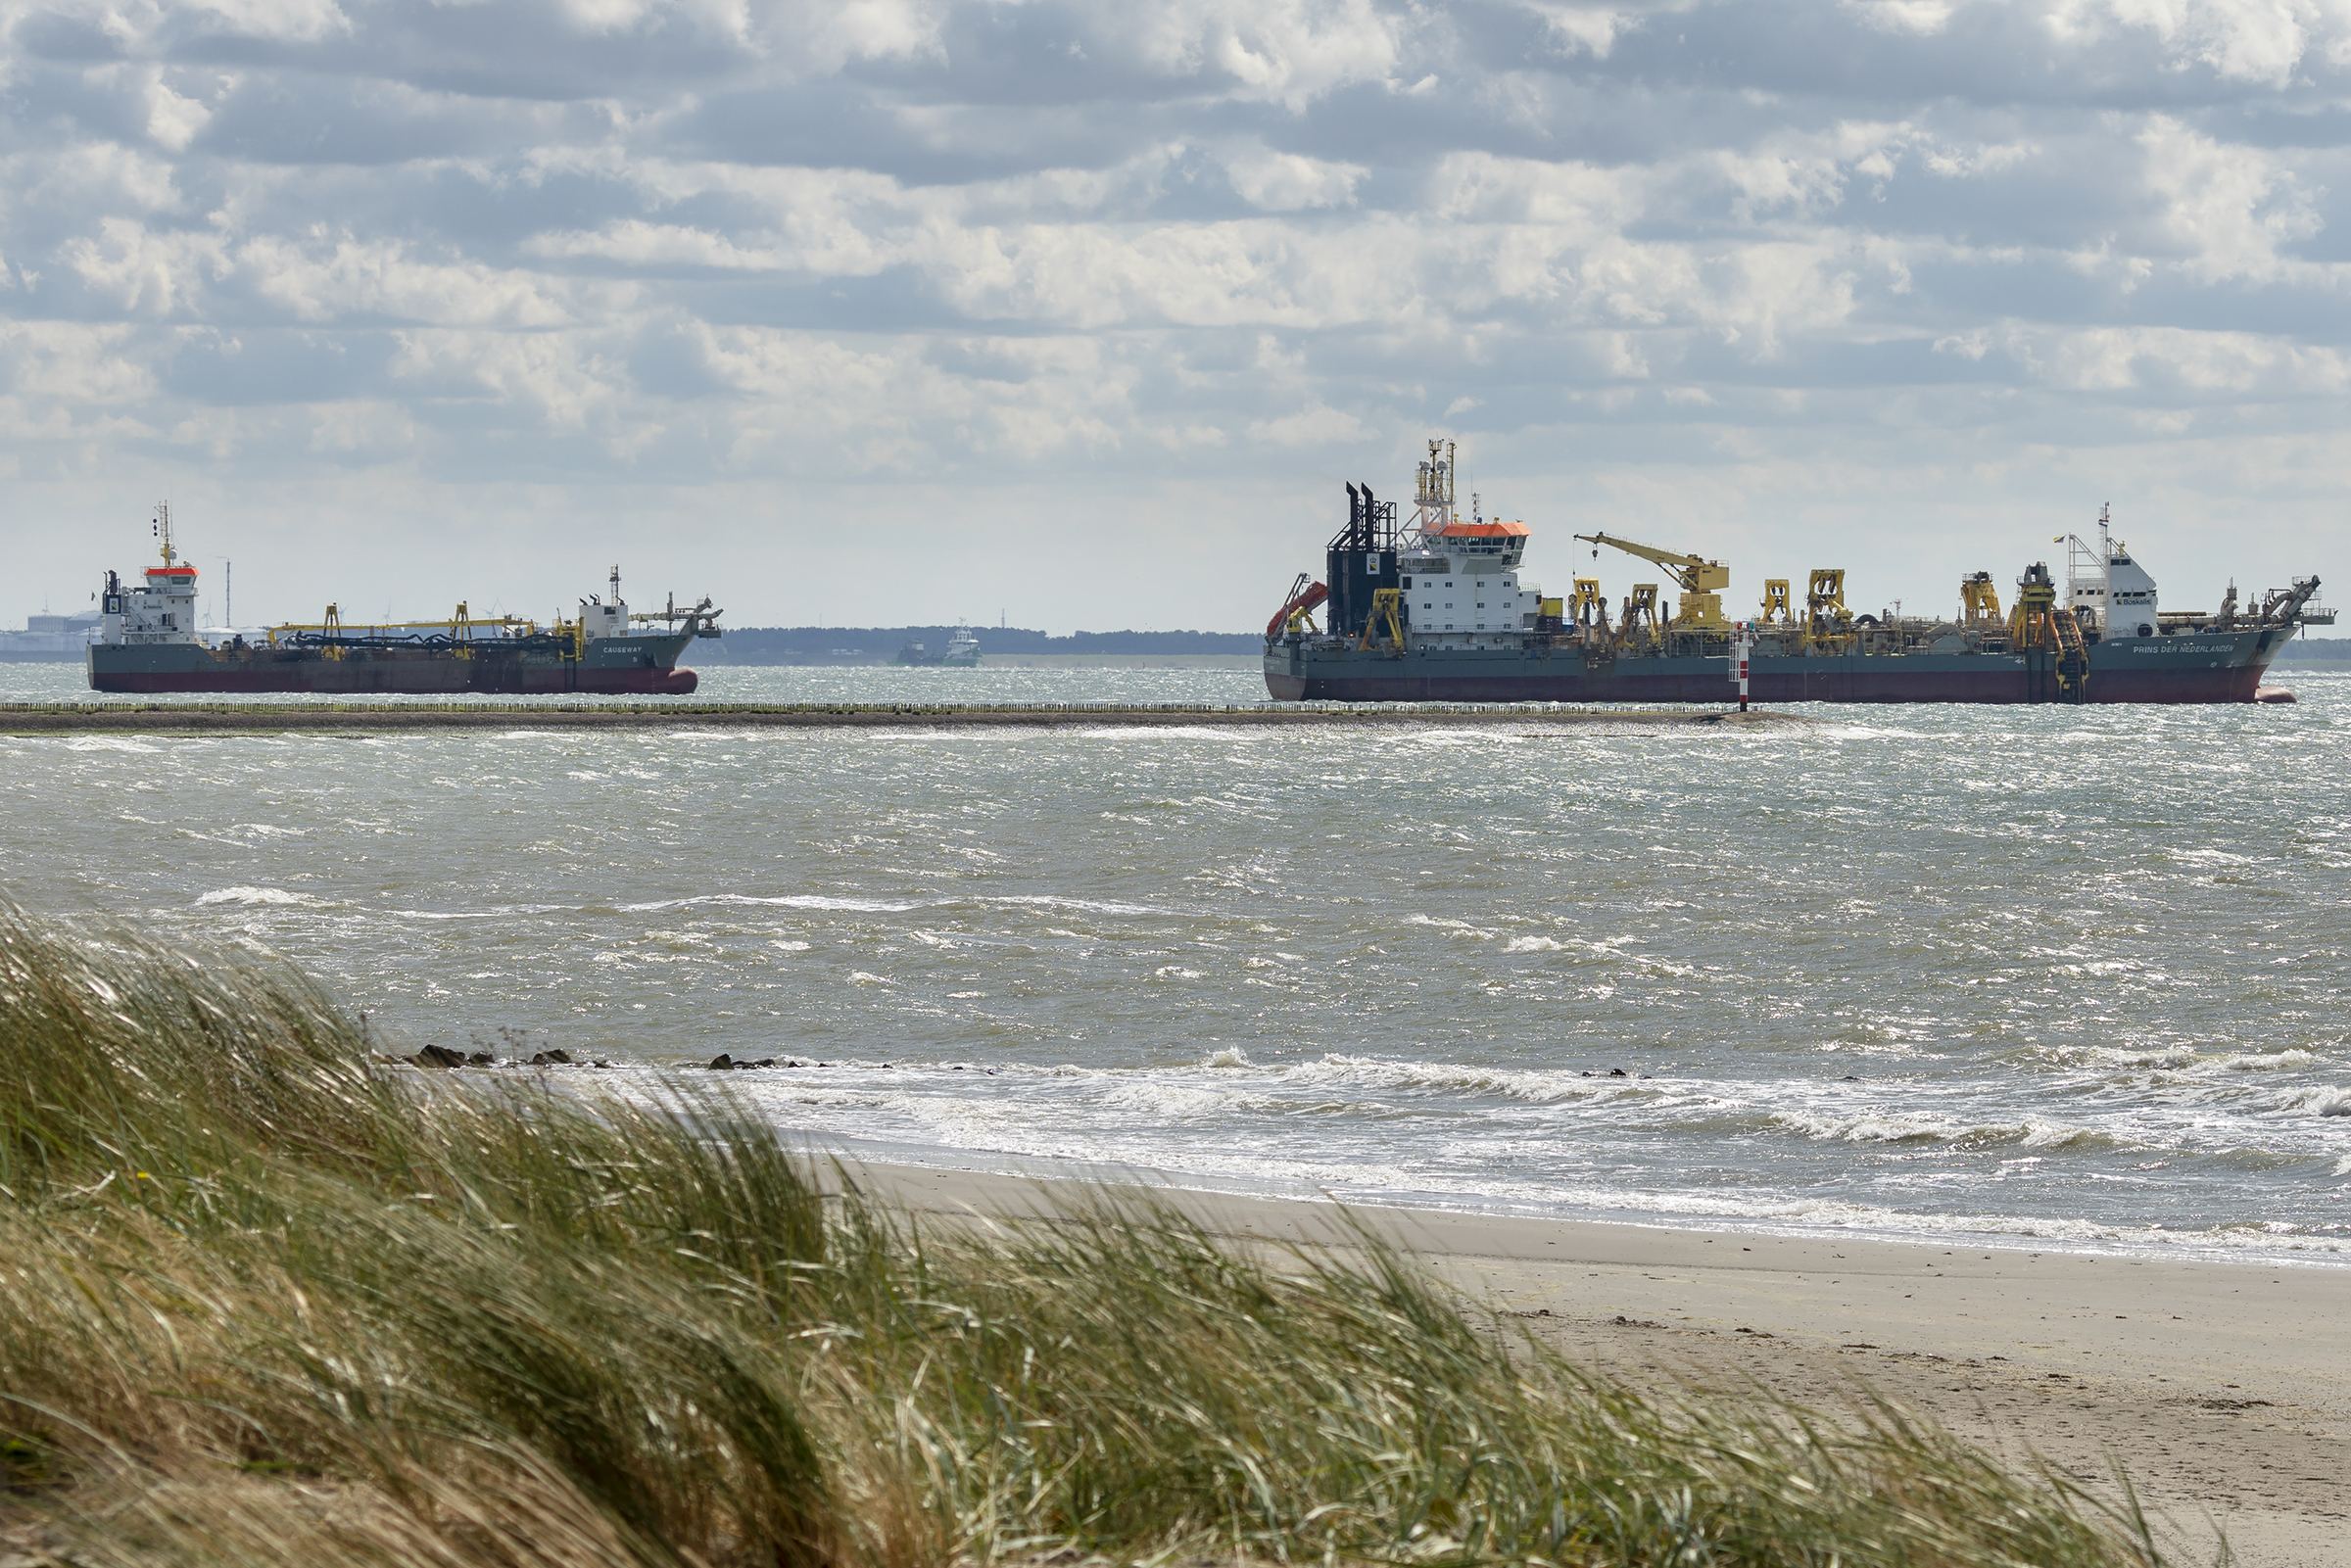 Dredging work carried out by the trailing suction hopper dredgers Prins der Nederlanden and Causeway